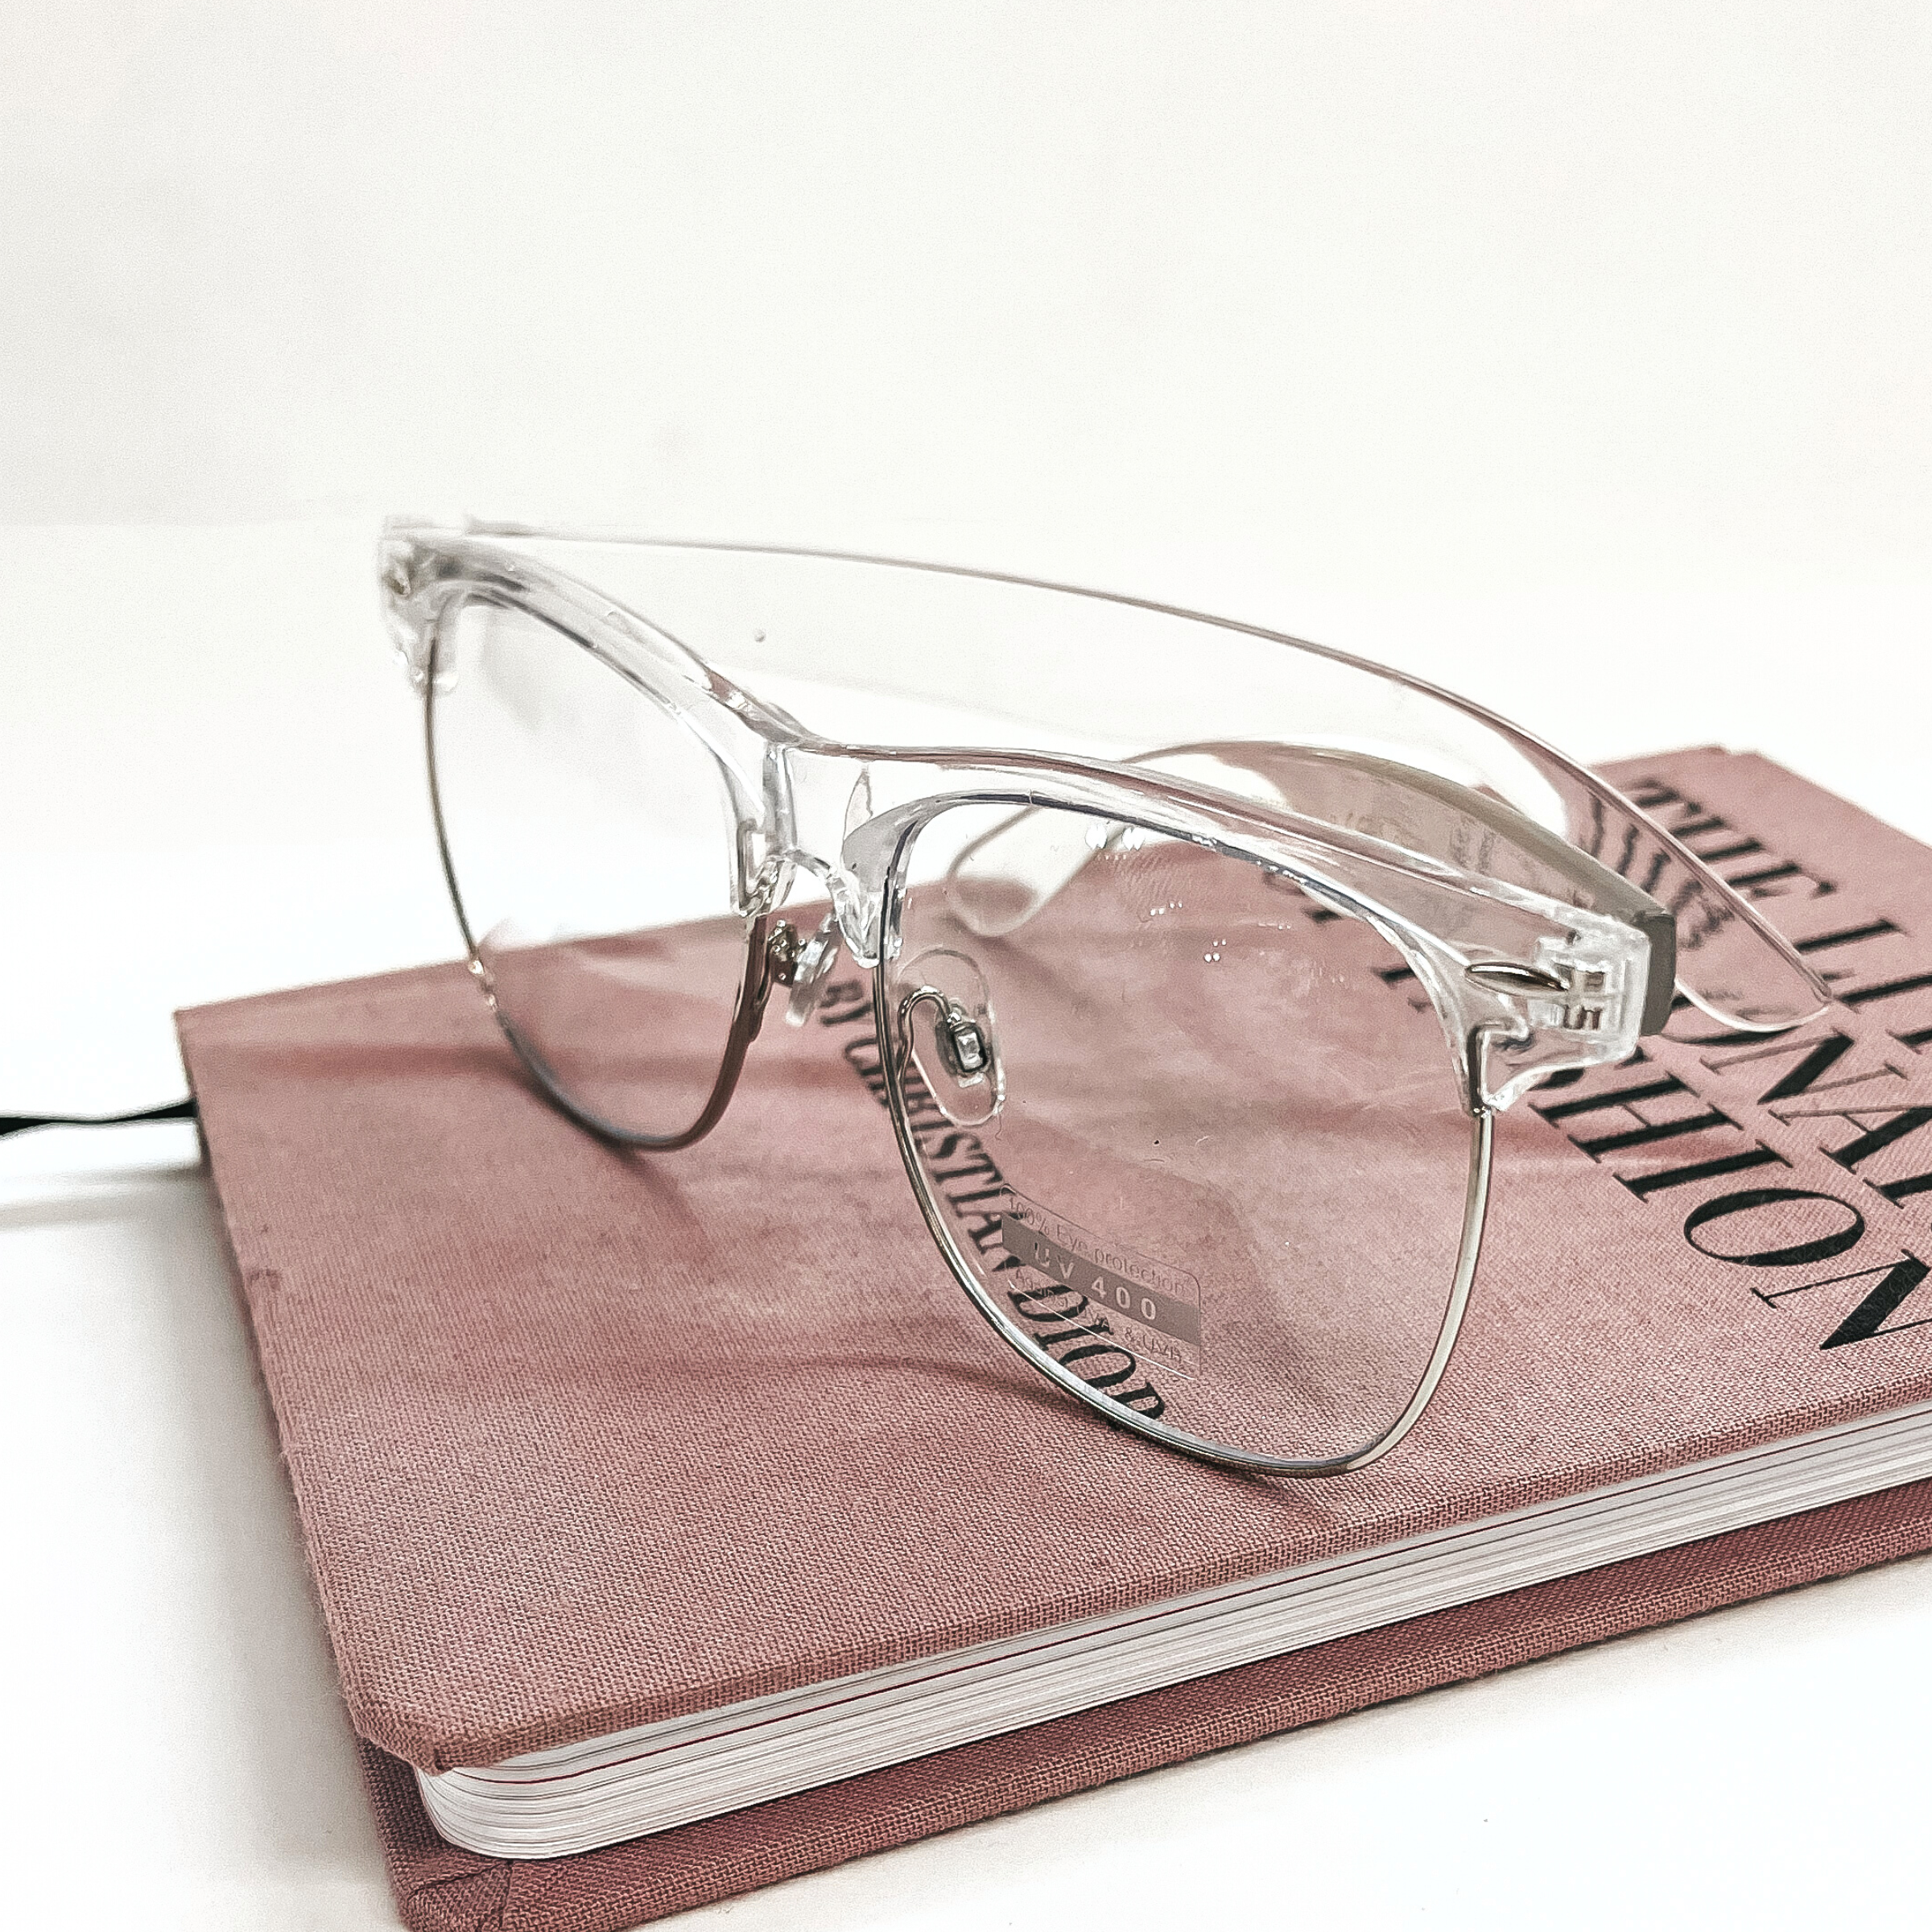 These are clear frame glasses with a clear lenses and a silver outline in the bottom. These glasses are taken on top of a pink/purple fashion book and on a white background.